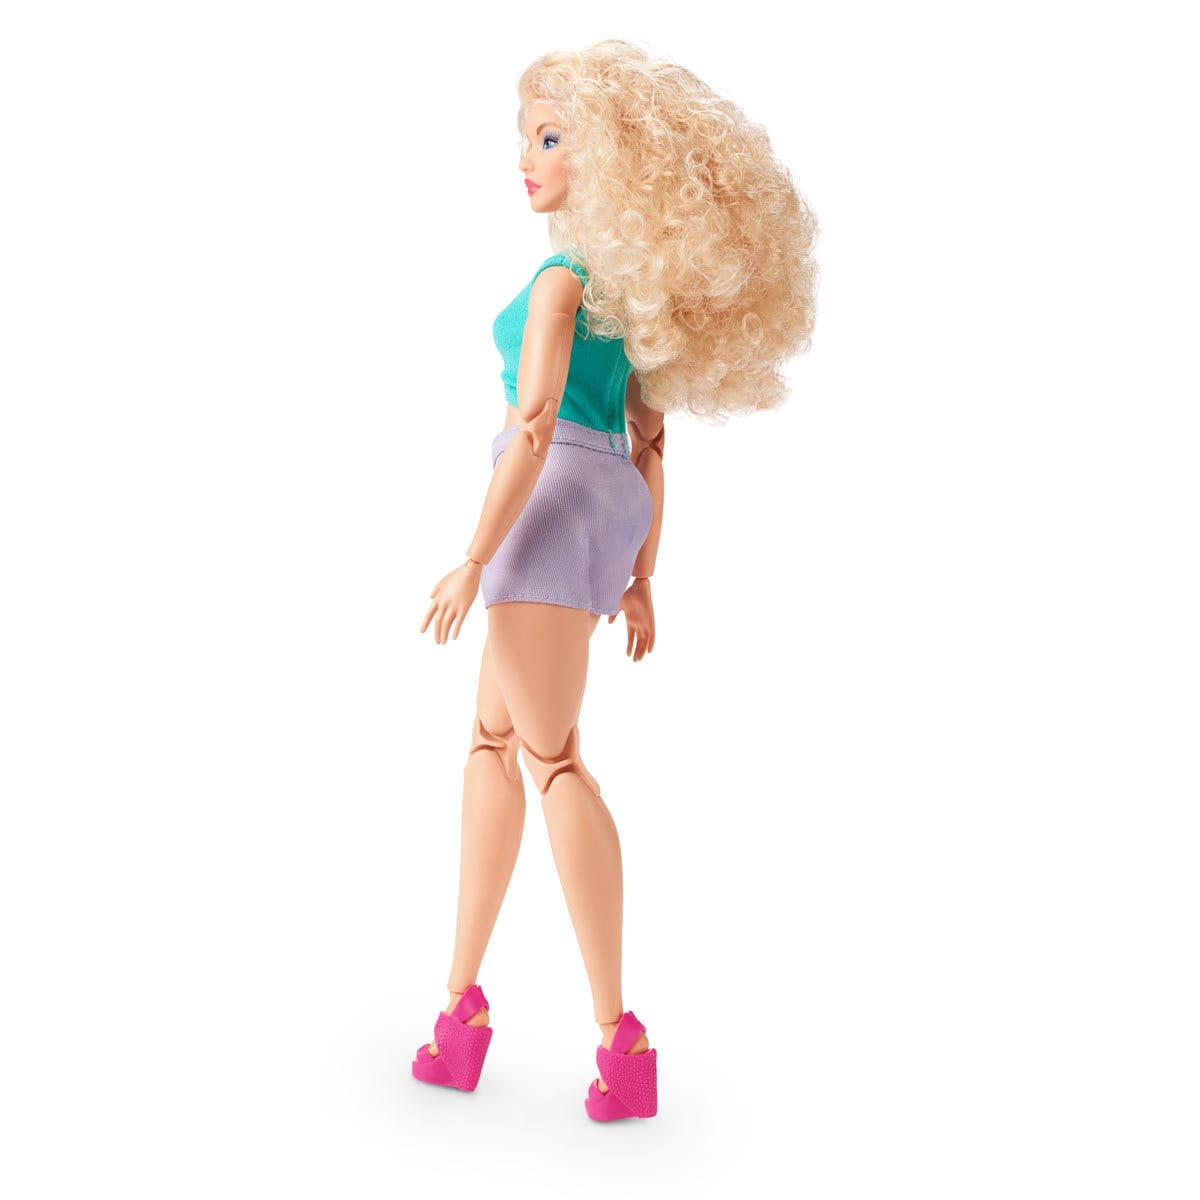 Barbie Looks Doll #16 with Blonde Hair